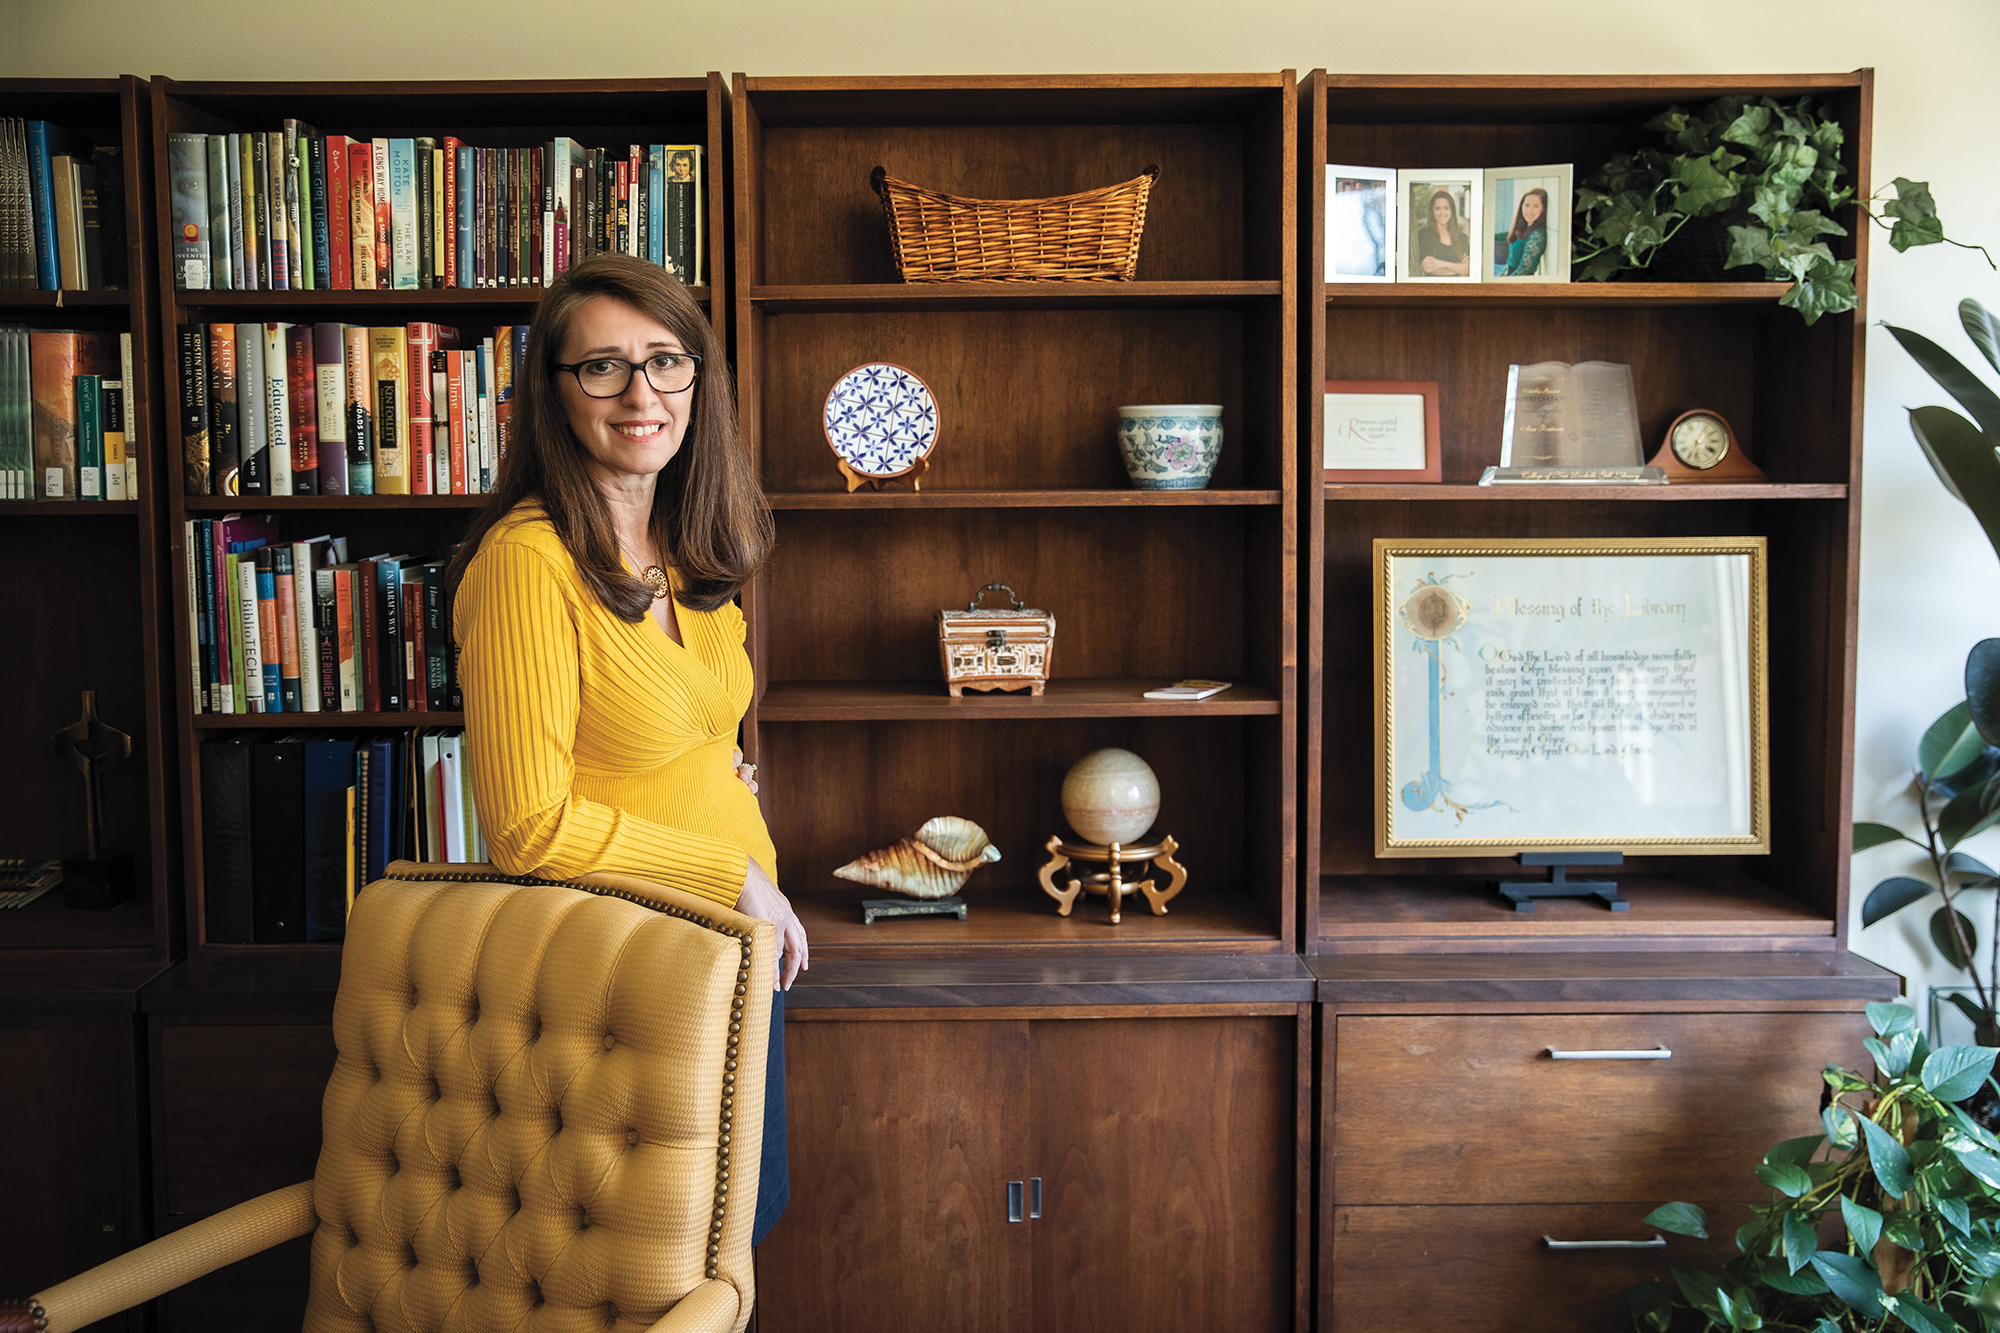 A woman wearing glasses rests her arm on the top of a chair. Behind her, bookcases filled with books, ceramics and framed art.